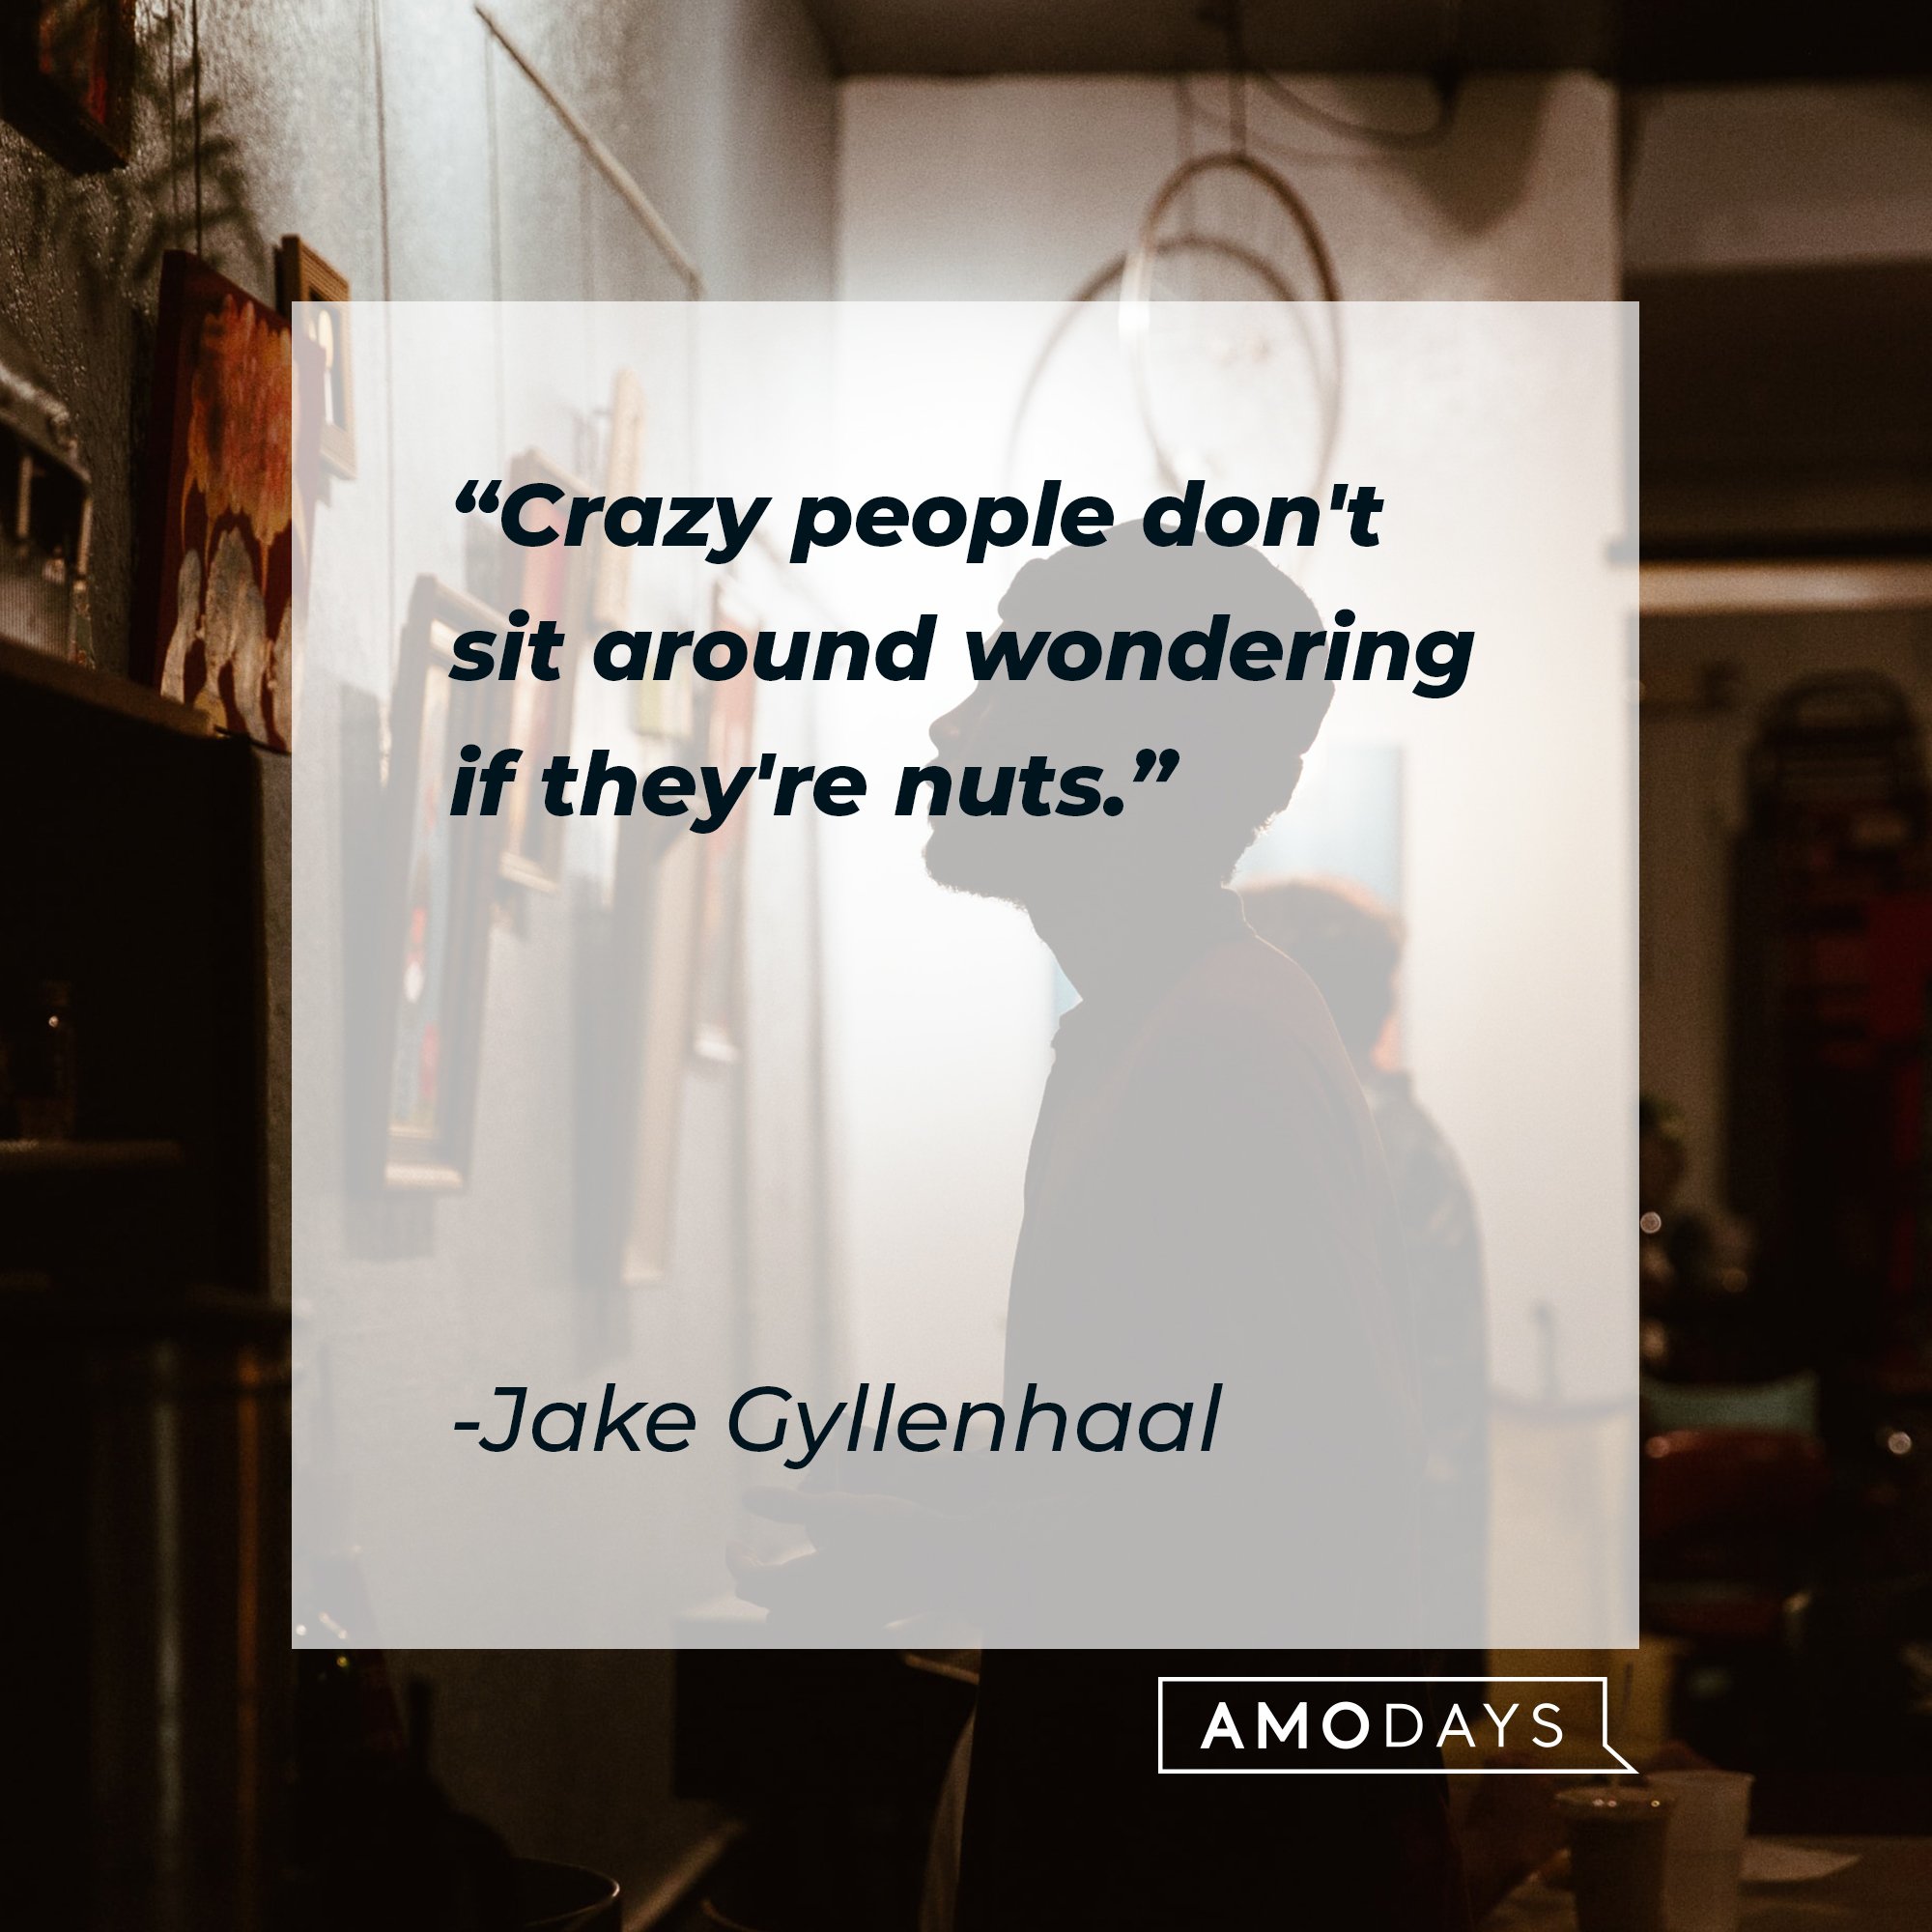 Jake Gyllenhaal’s quote: "Crazy people don't sit around wondering if they're nuts." | Image: AmoDays